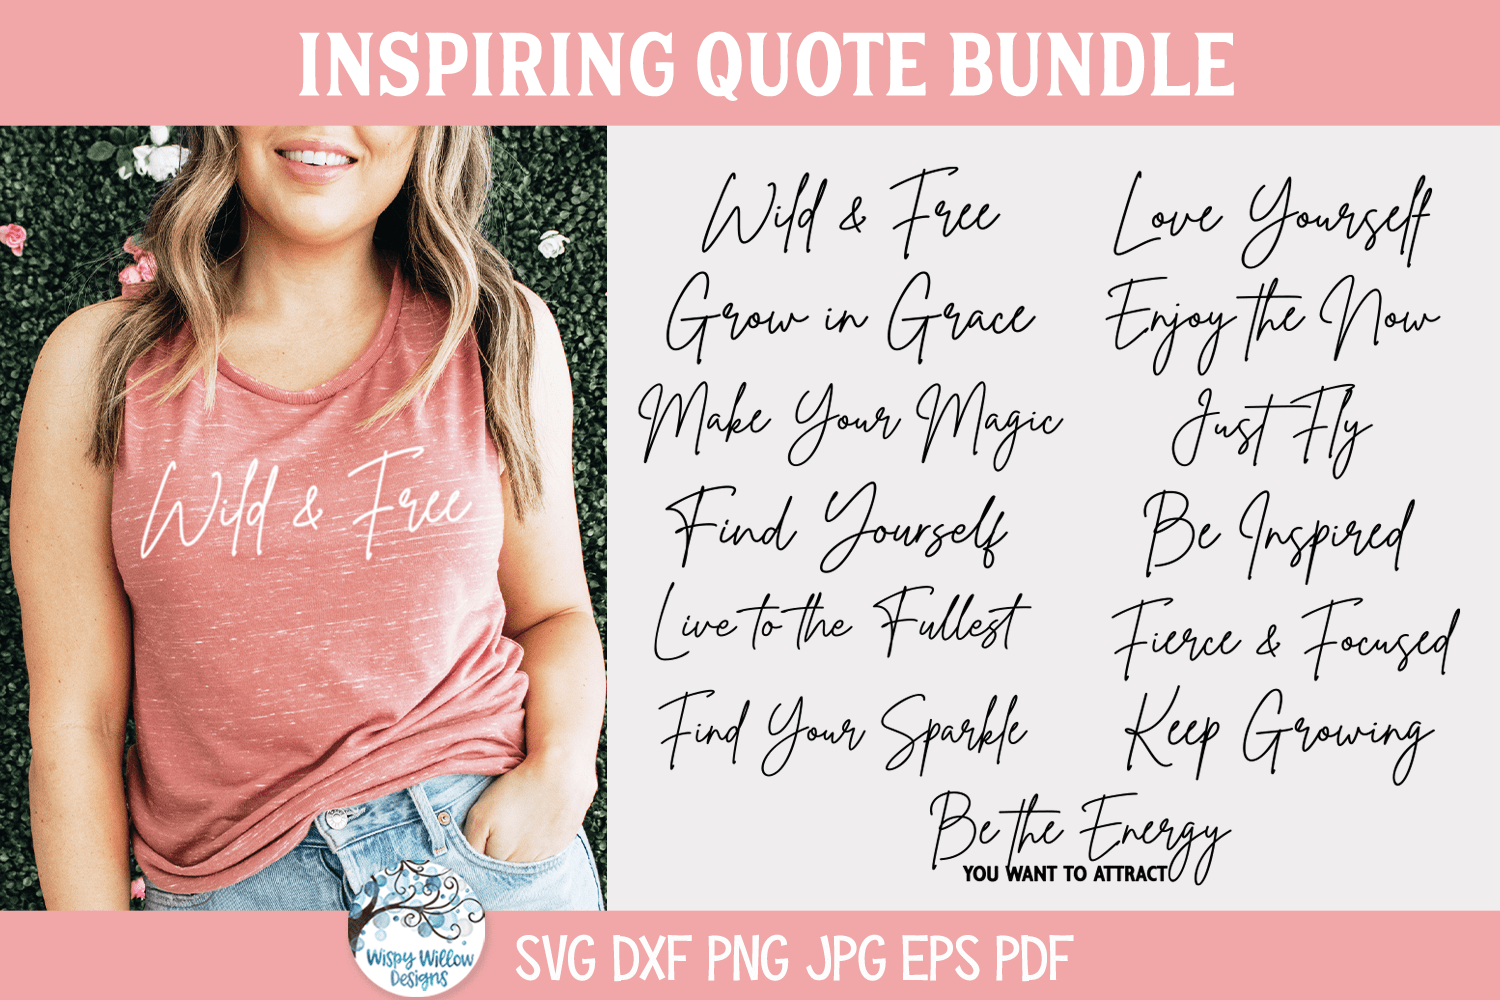 Inspiring Quote SVG Bundle | Personal Growth & Self-Love Designs Wispy Willow Designs Company